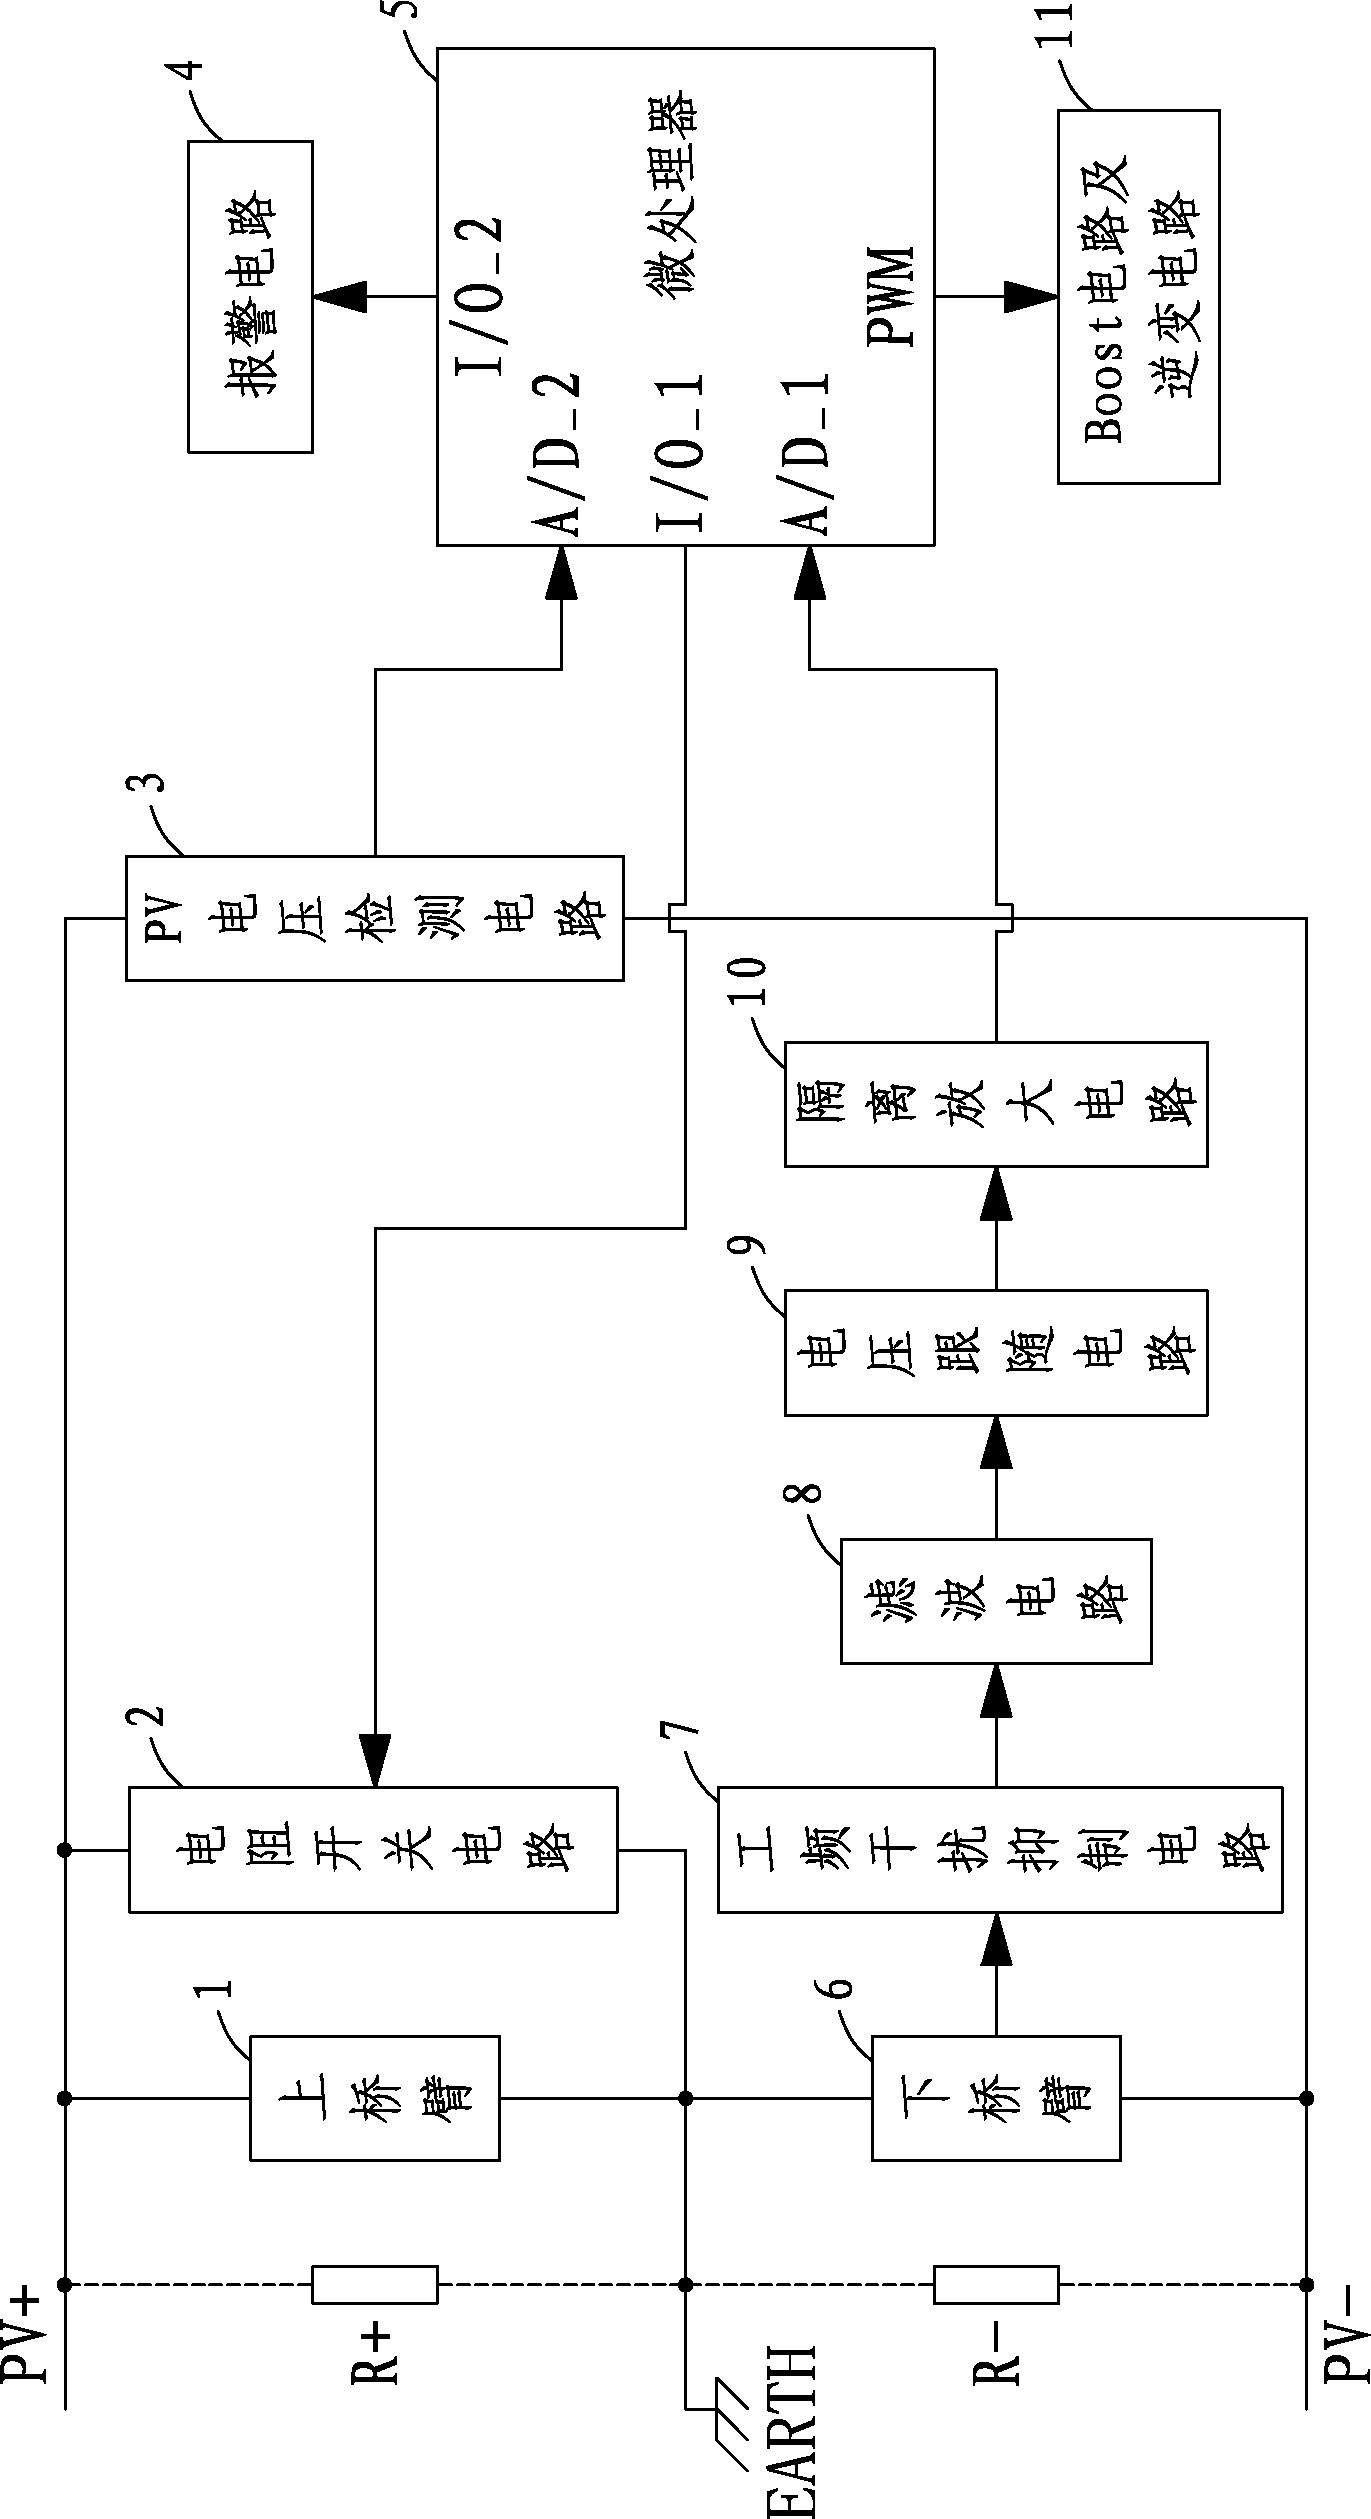 Online detection method of insulating resistance to ground of photovoltaic grid-connected inverter